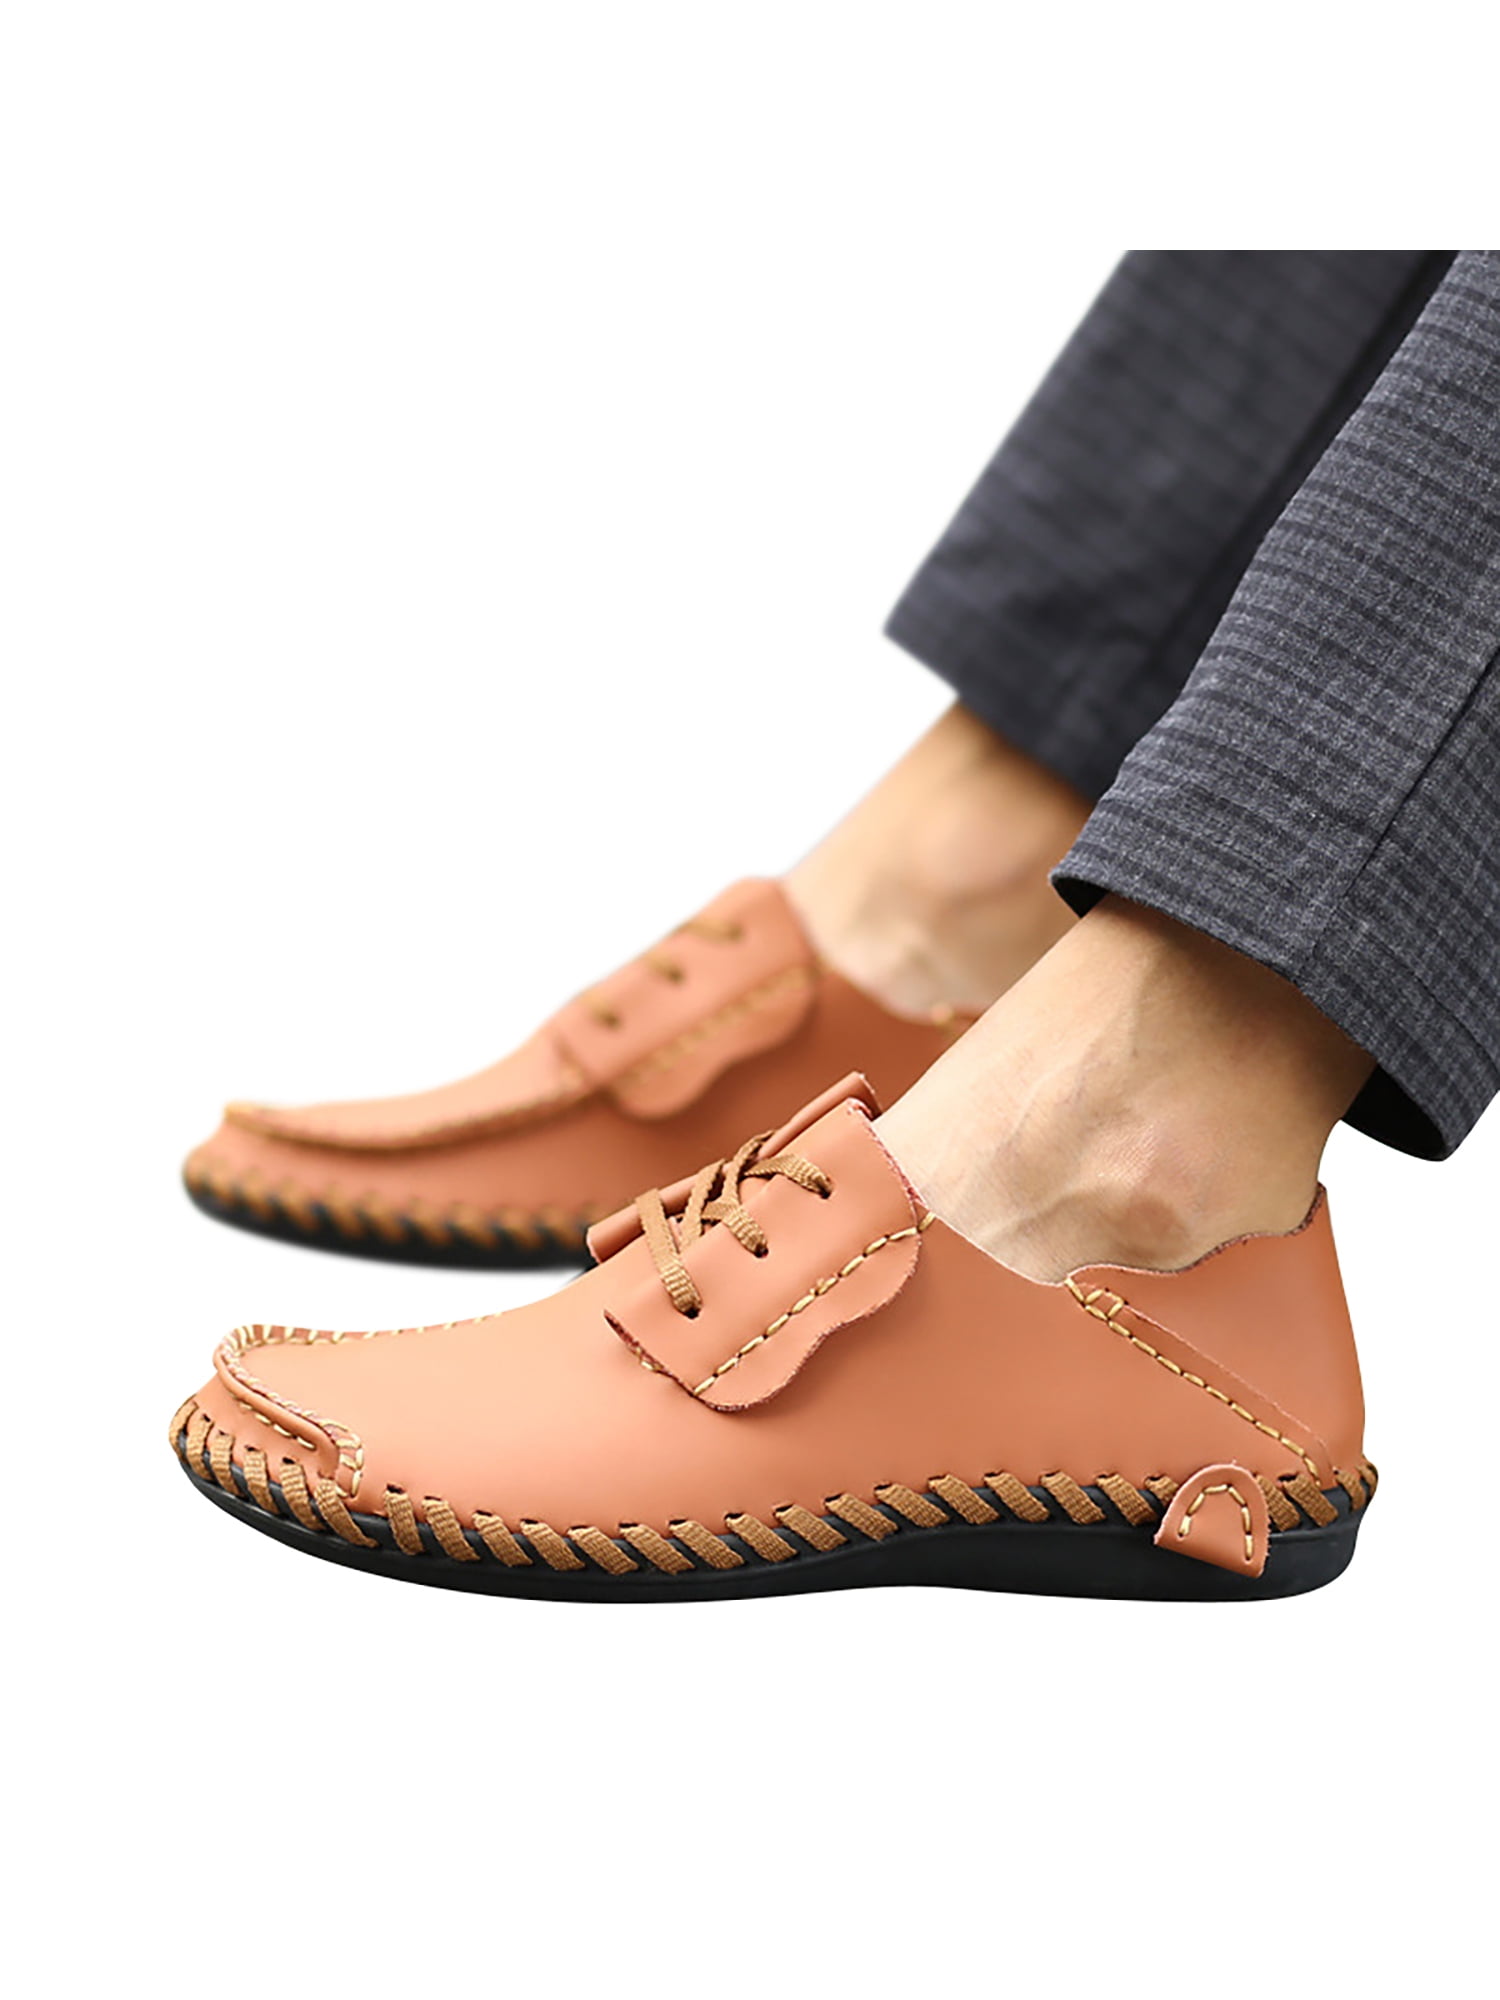 Mens Shoes Mens Fashion Business Work Shoes PU Leather Breathable Comfortable Loafers Lined Anti-Slip Flat Lace Up Round Toe Fashion